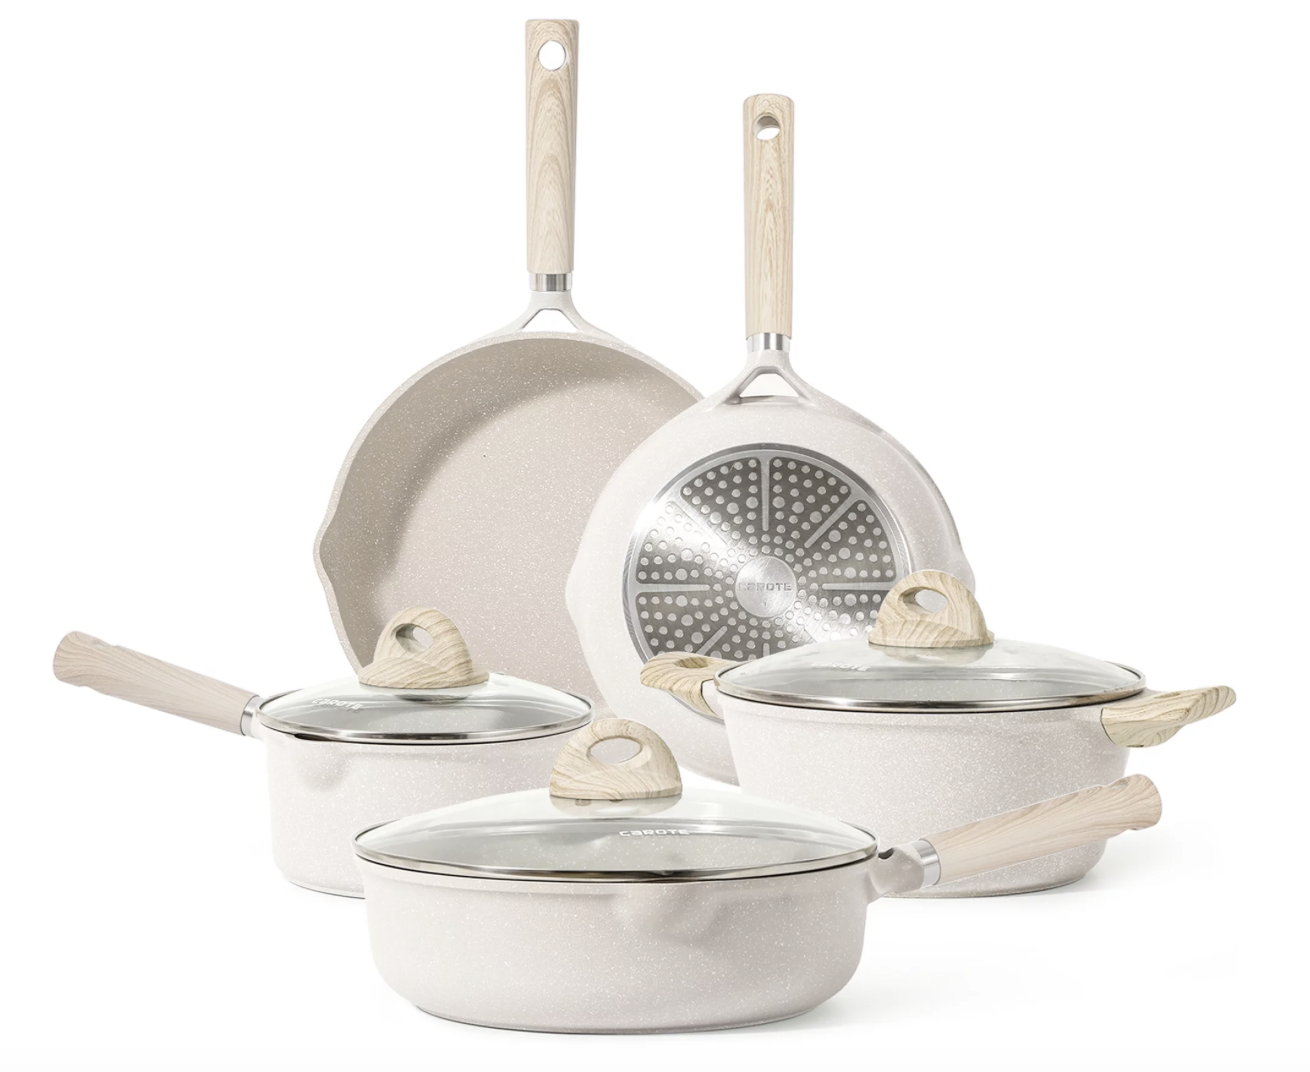 *HOT* Carote 8-Piece Nonstick Pots and Pans Set solely $67.99 shipped (Reg. $240!)